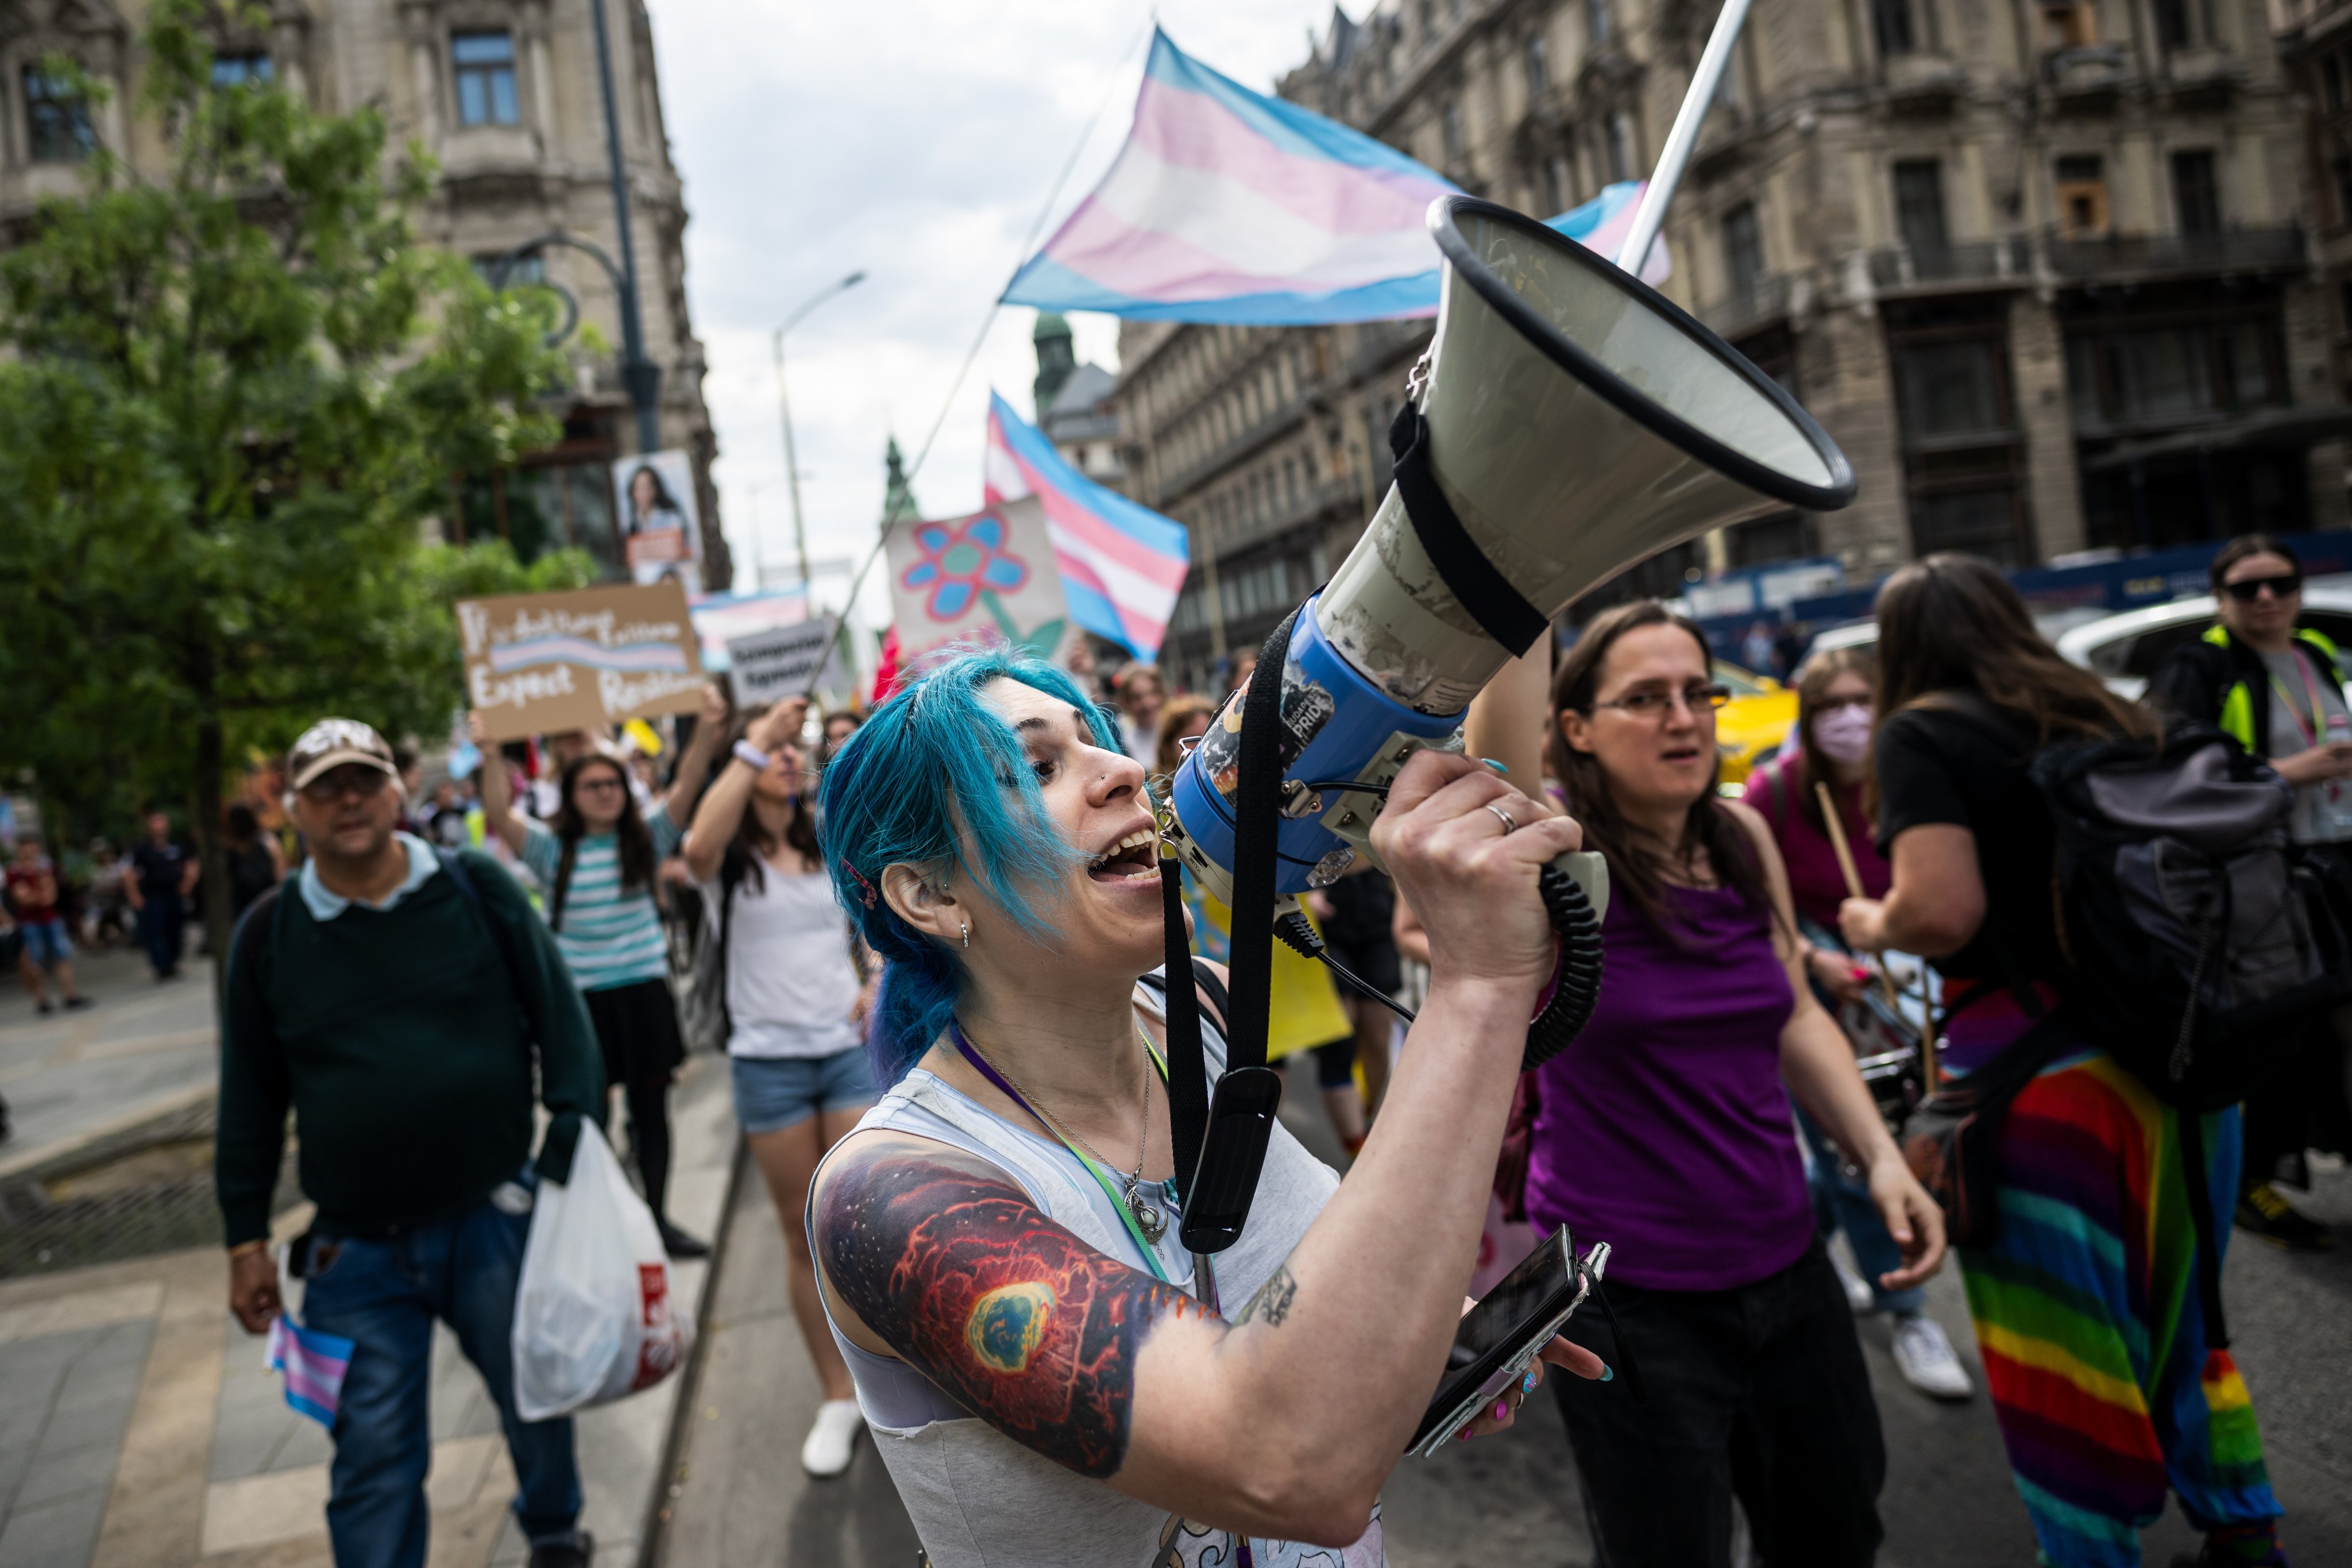 People take part in the Trans Pride parade in Budapest. Intersex and trans people had the highest rates of respondents who said they had experienced a physical or sexual attack in the five years before the survey for being LGBTIQ. Photo: dpa